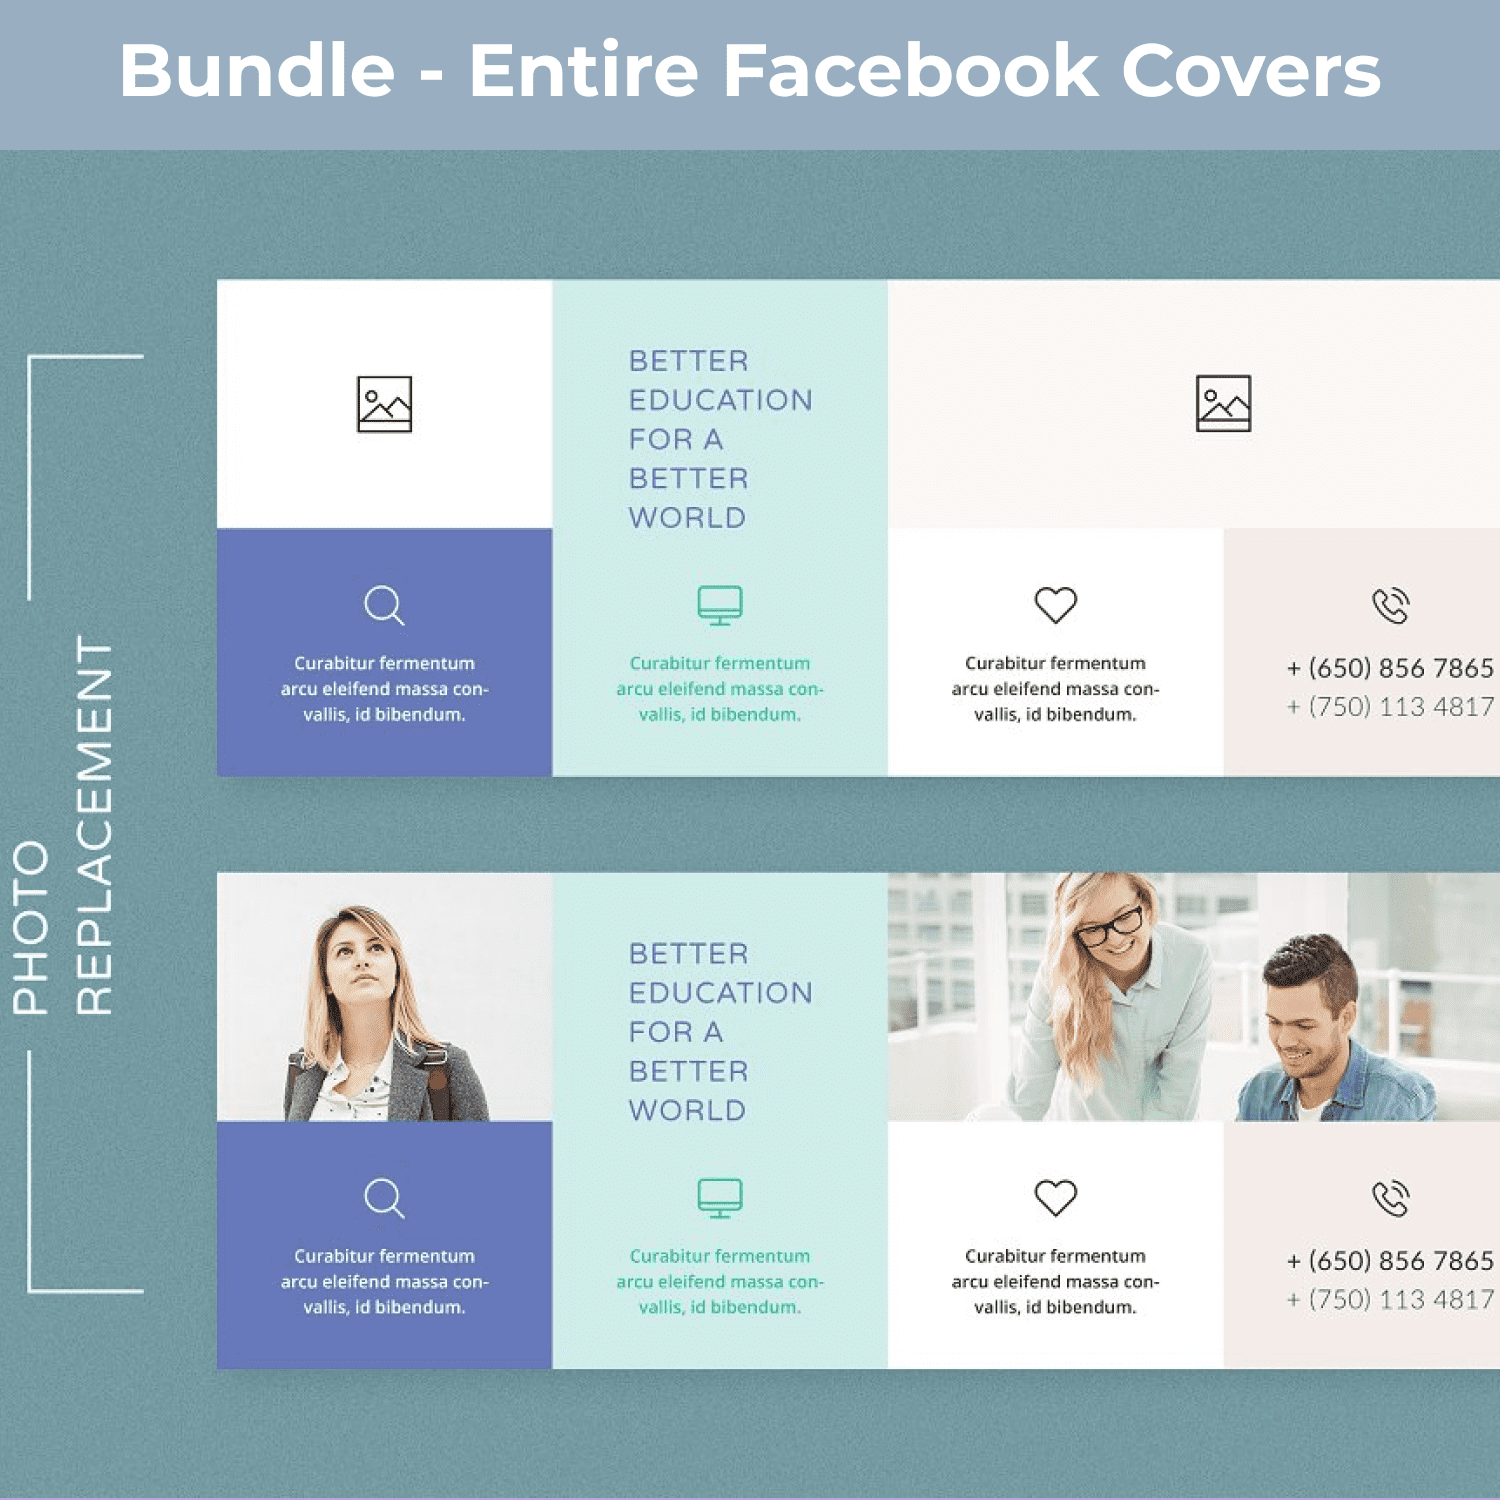 Bundle - Entire Facebook Covers cover image.